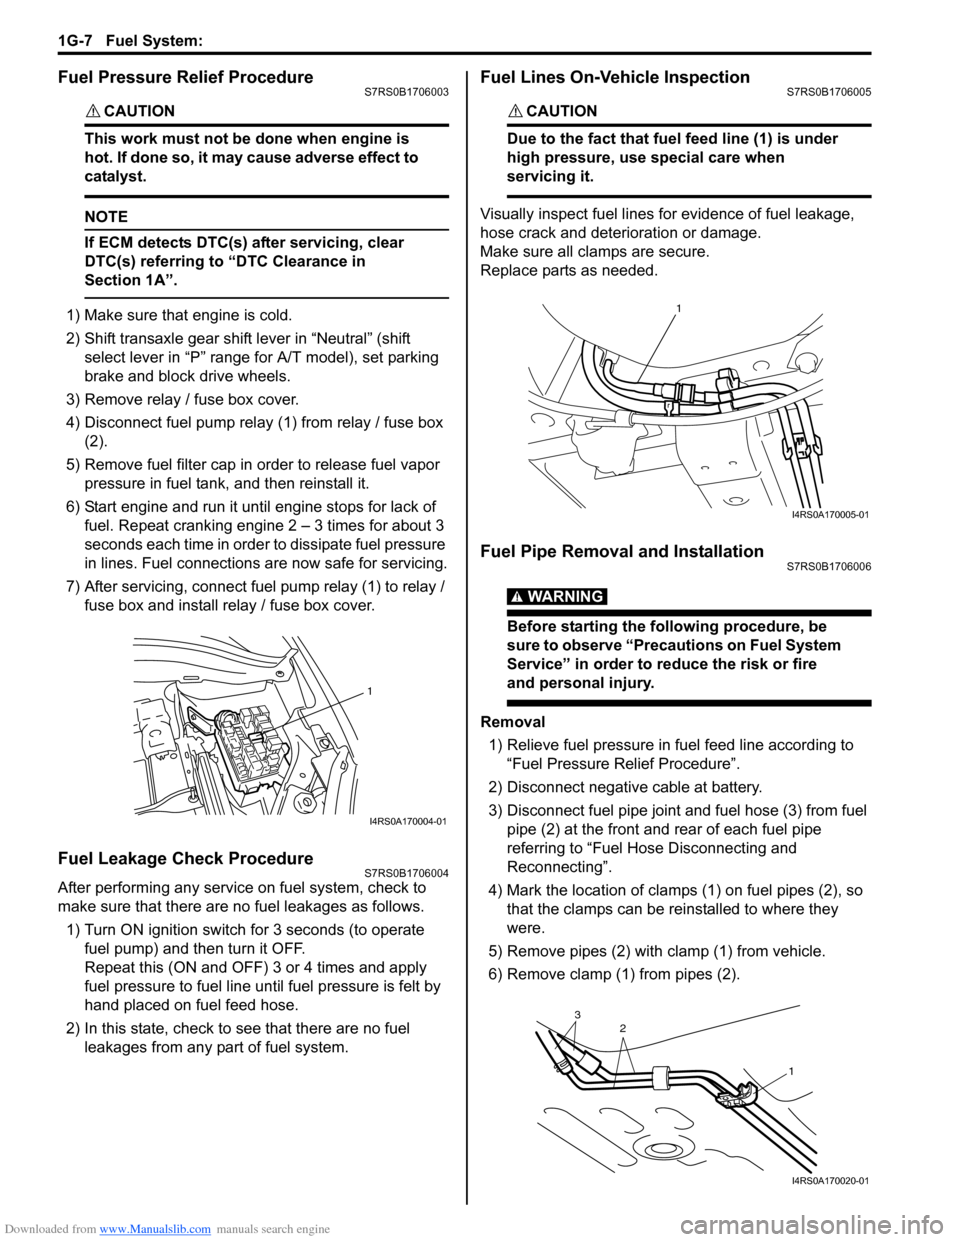 SUZUKI SWIFT 2008 2.G Service Workshop Manual Downloaded from www.Manualslib.com manuals search engine 1G-7 Fuel System: 
Fuel Pressure Relief ProcedureS7RS0B1706003
CAUTION! 
This work must not be done when engine is 
hot. If done so, it may cau